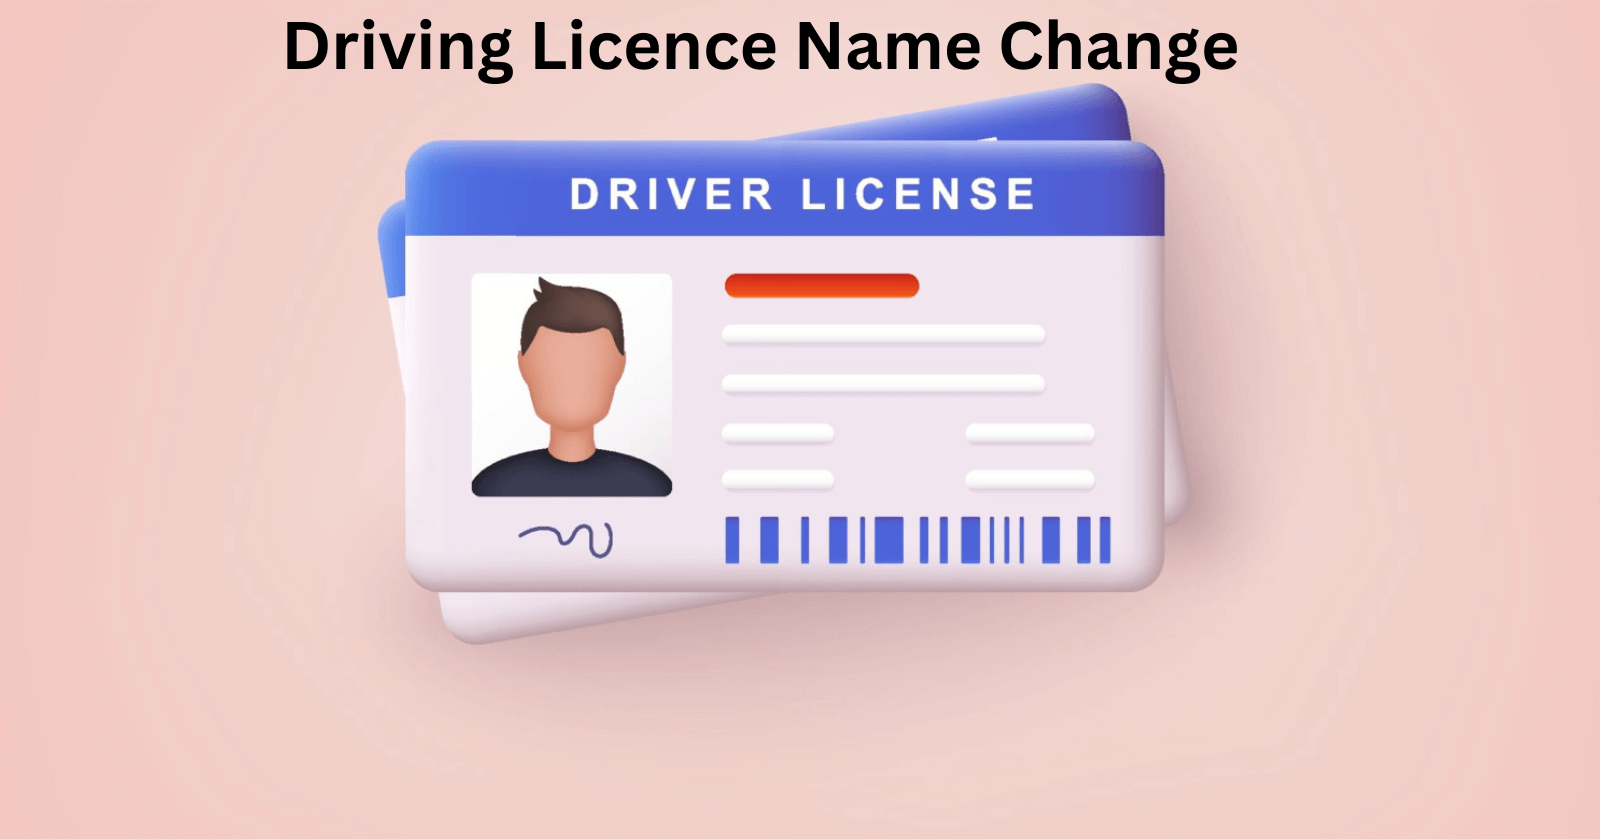 DL (Driving Licence) Name Change: A Step-By-Step Guide